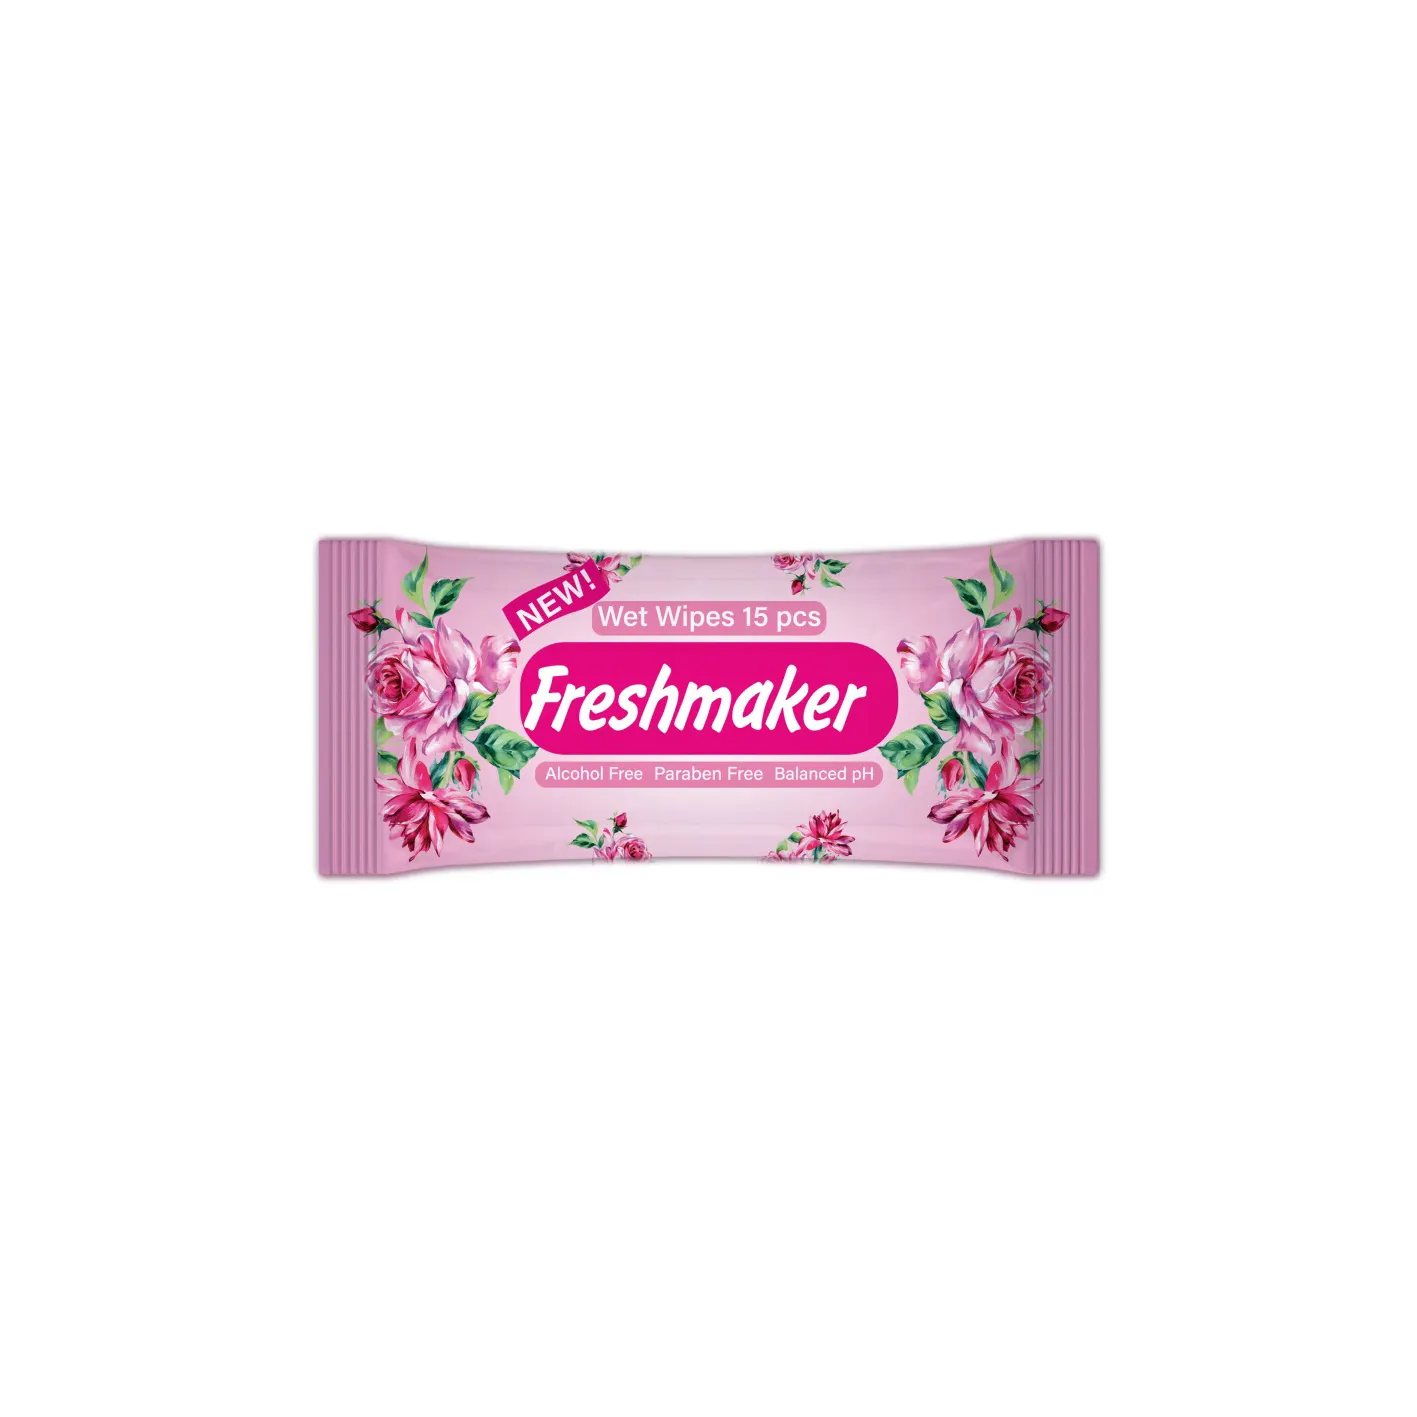 Wet Wipes Freshmaker Flower Pocket 15 pieces 11*19cm - 35gsm High Quality Best Price Wet Towel Ask Price